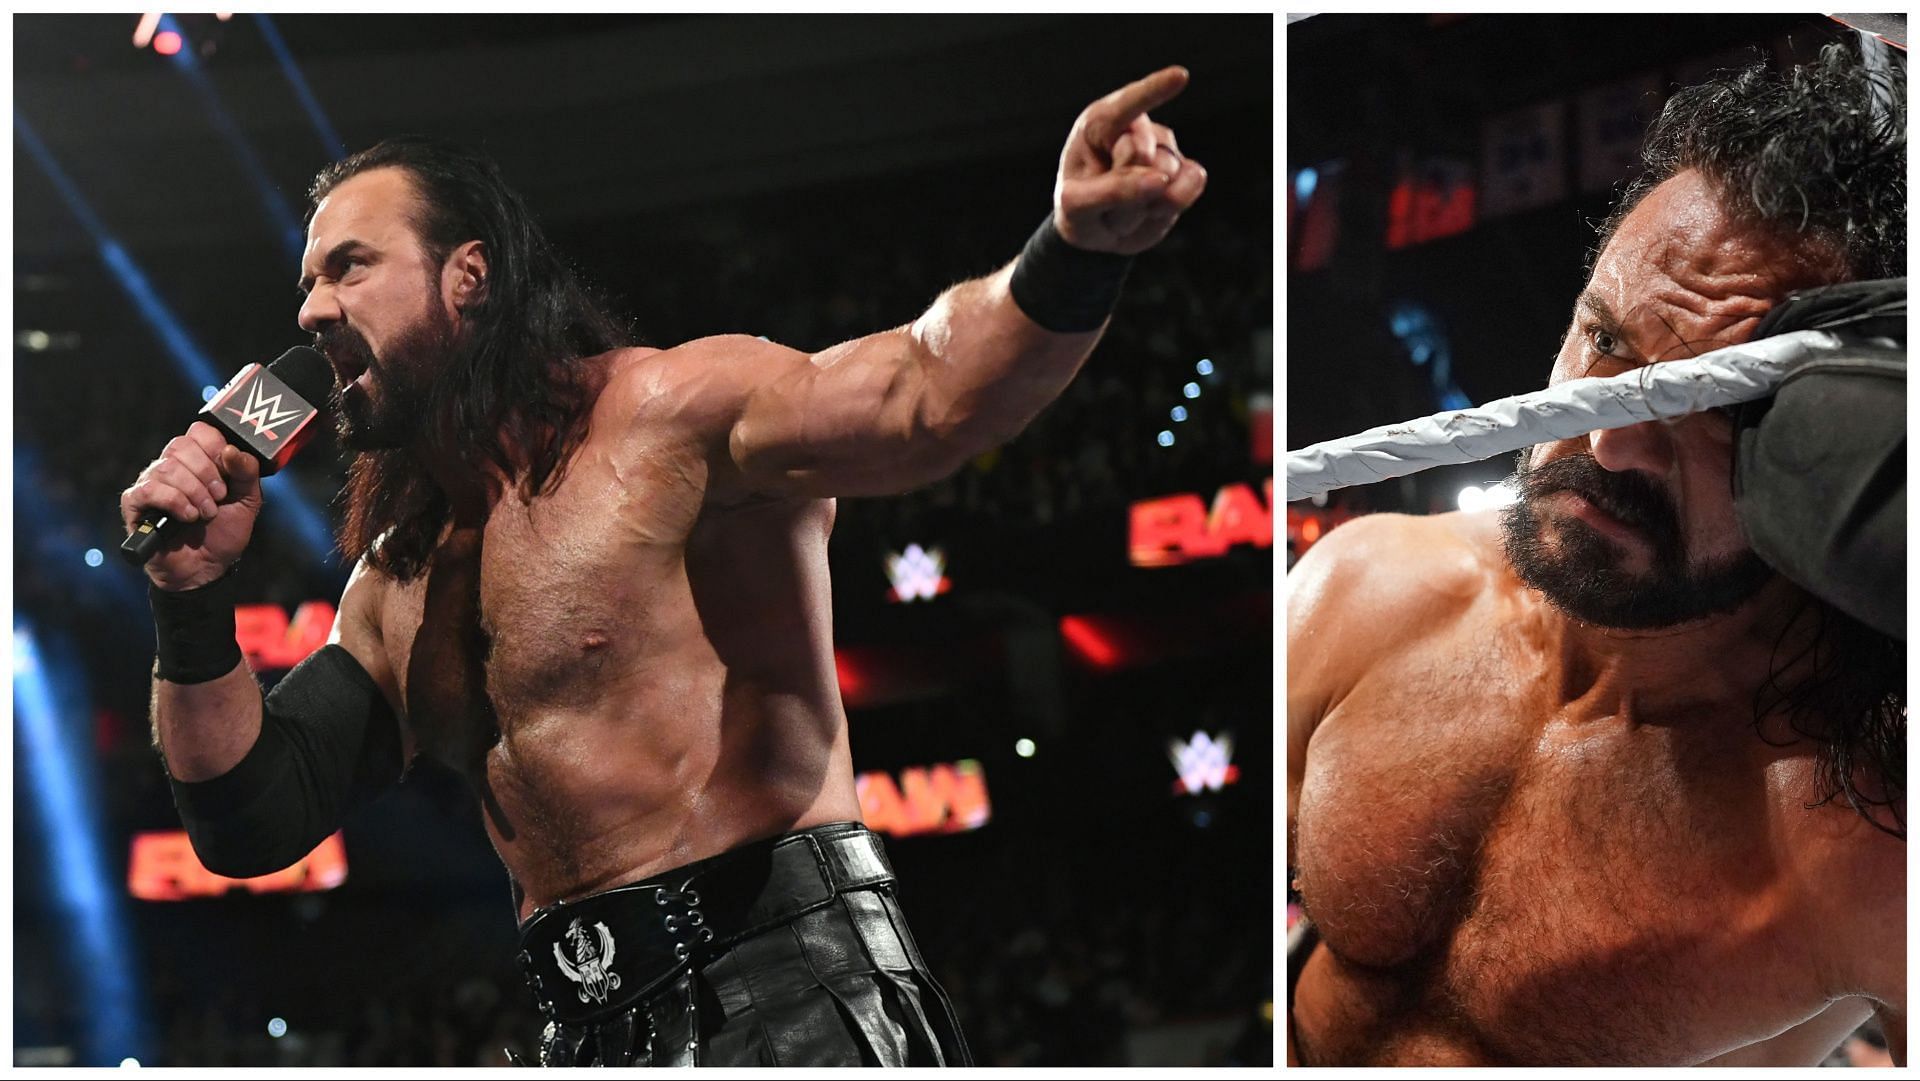 Drew McIntyre speaks out on WWE RAW, McIntyre takes another hard loss on RAW